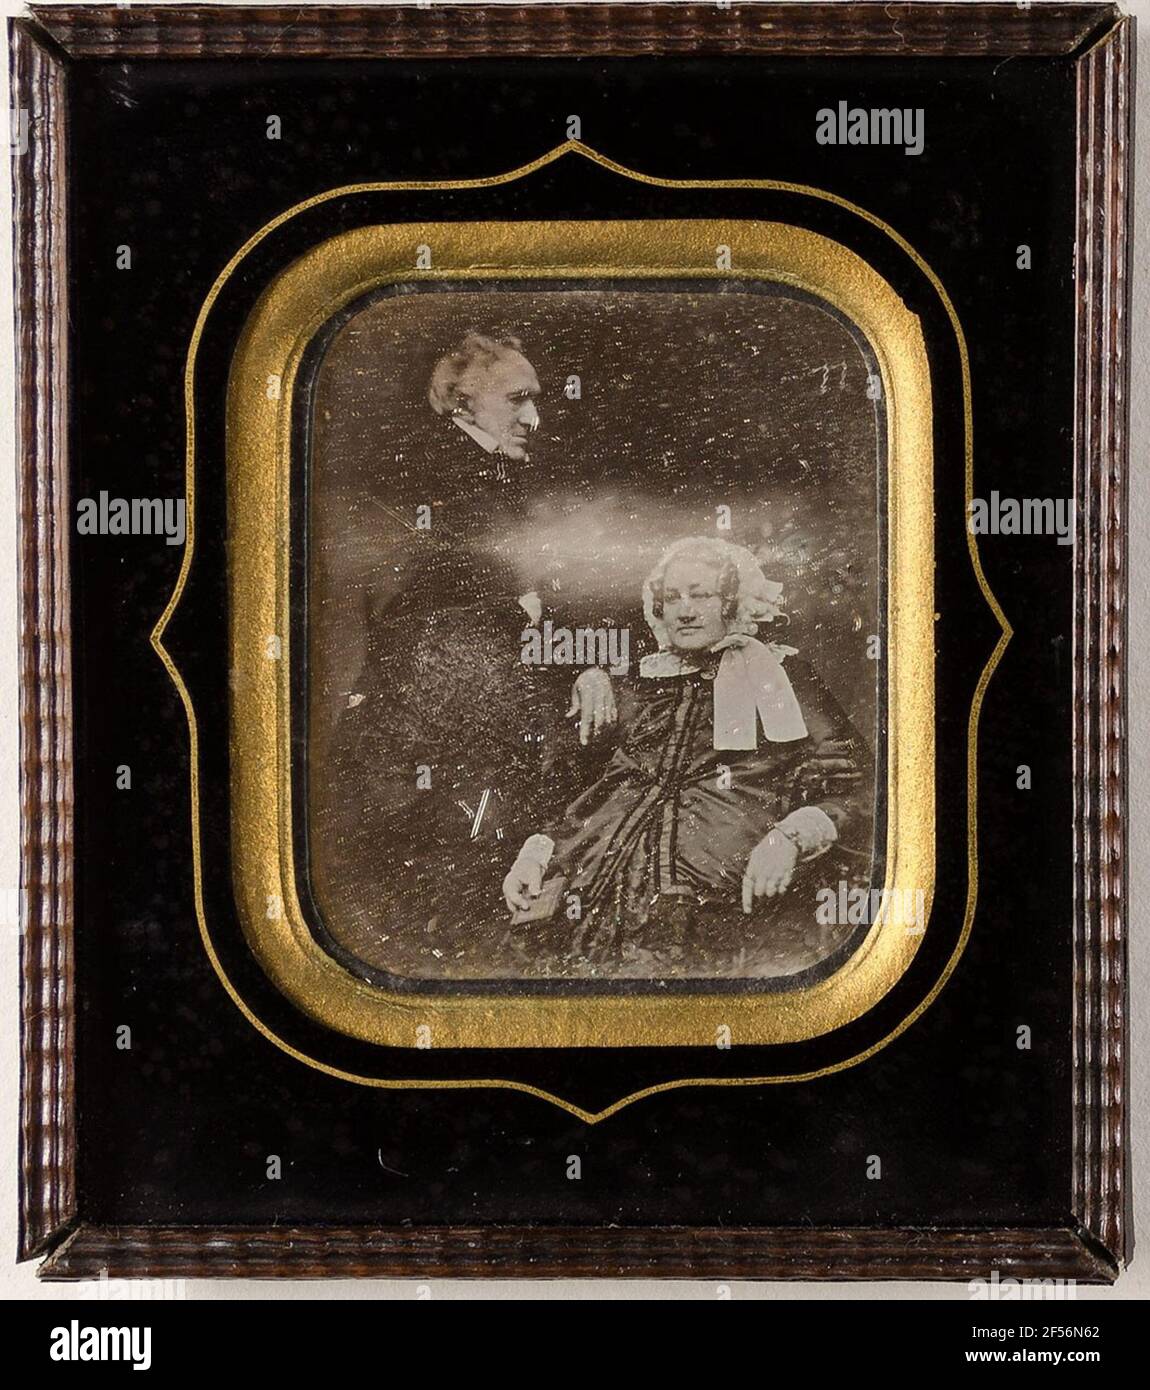 The Advokat Dr. Jur. Carl Trummer (1792-1858) with his wife, b. Beble (1801-1866). . Stock Photo